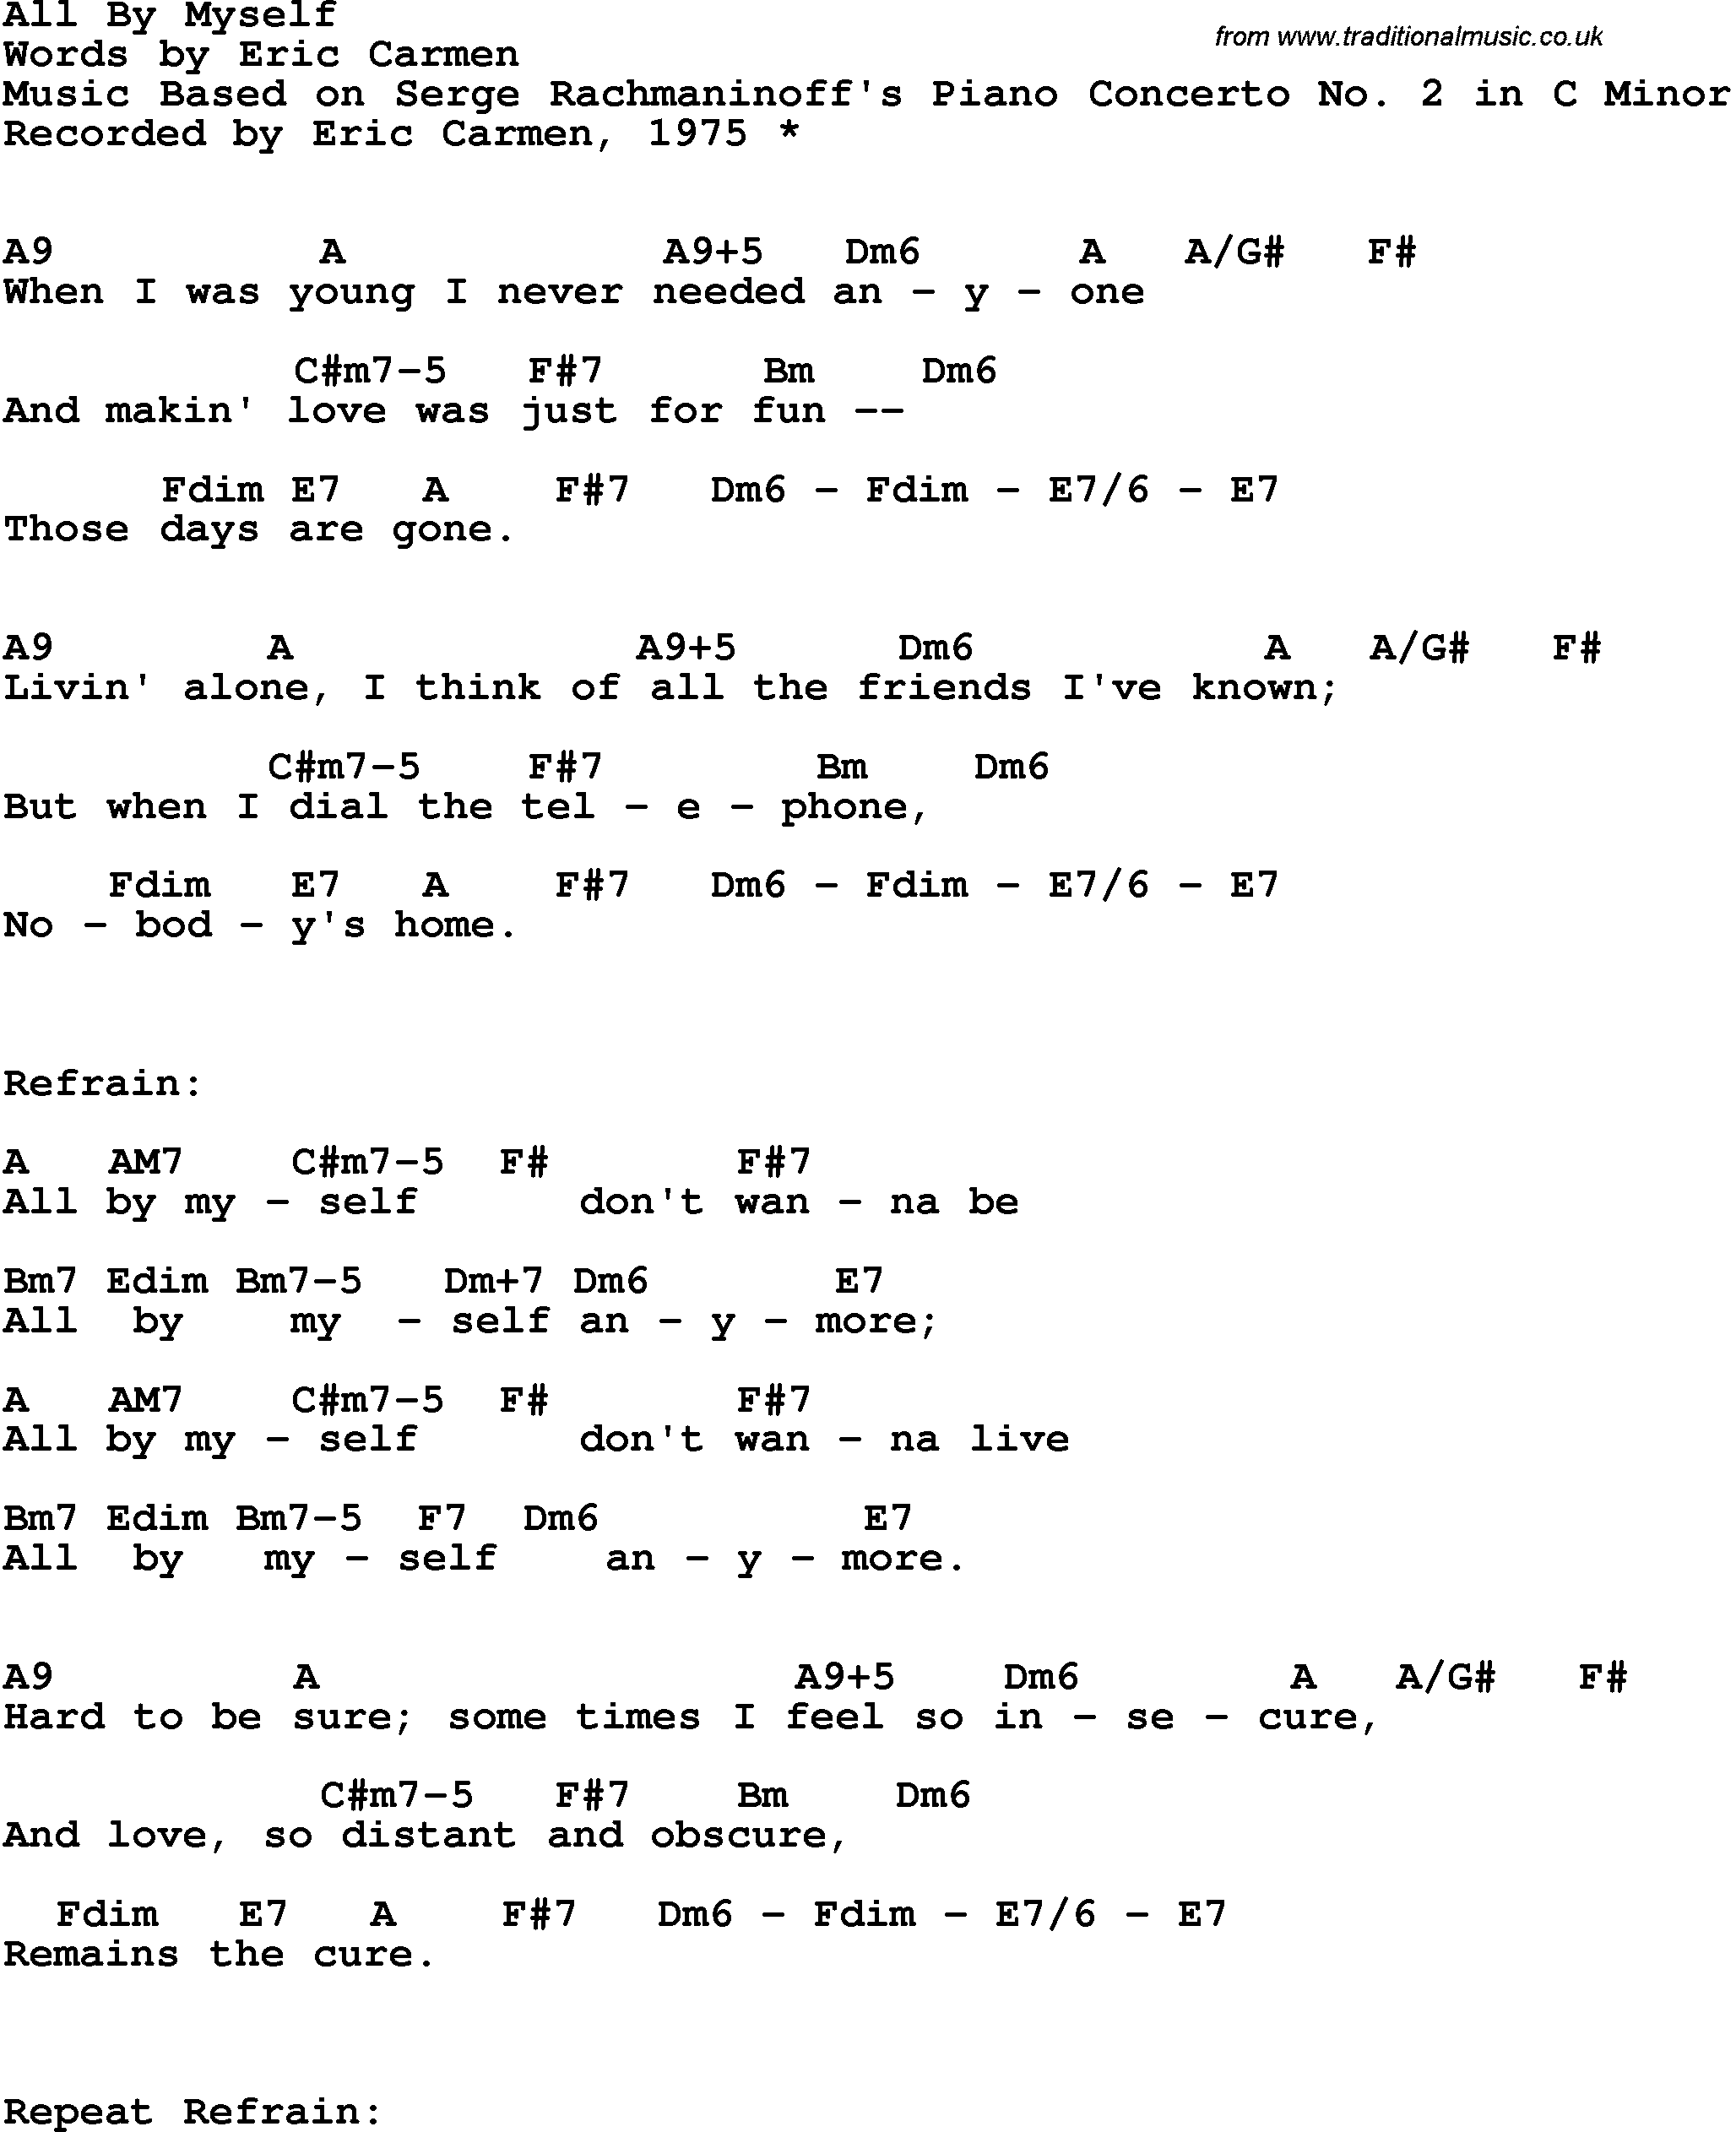 Song Lyrics with guitar chords for All By Myself - Eric Carmen, 1975